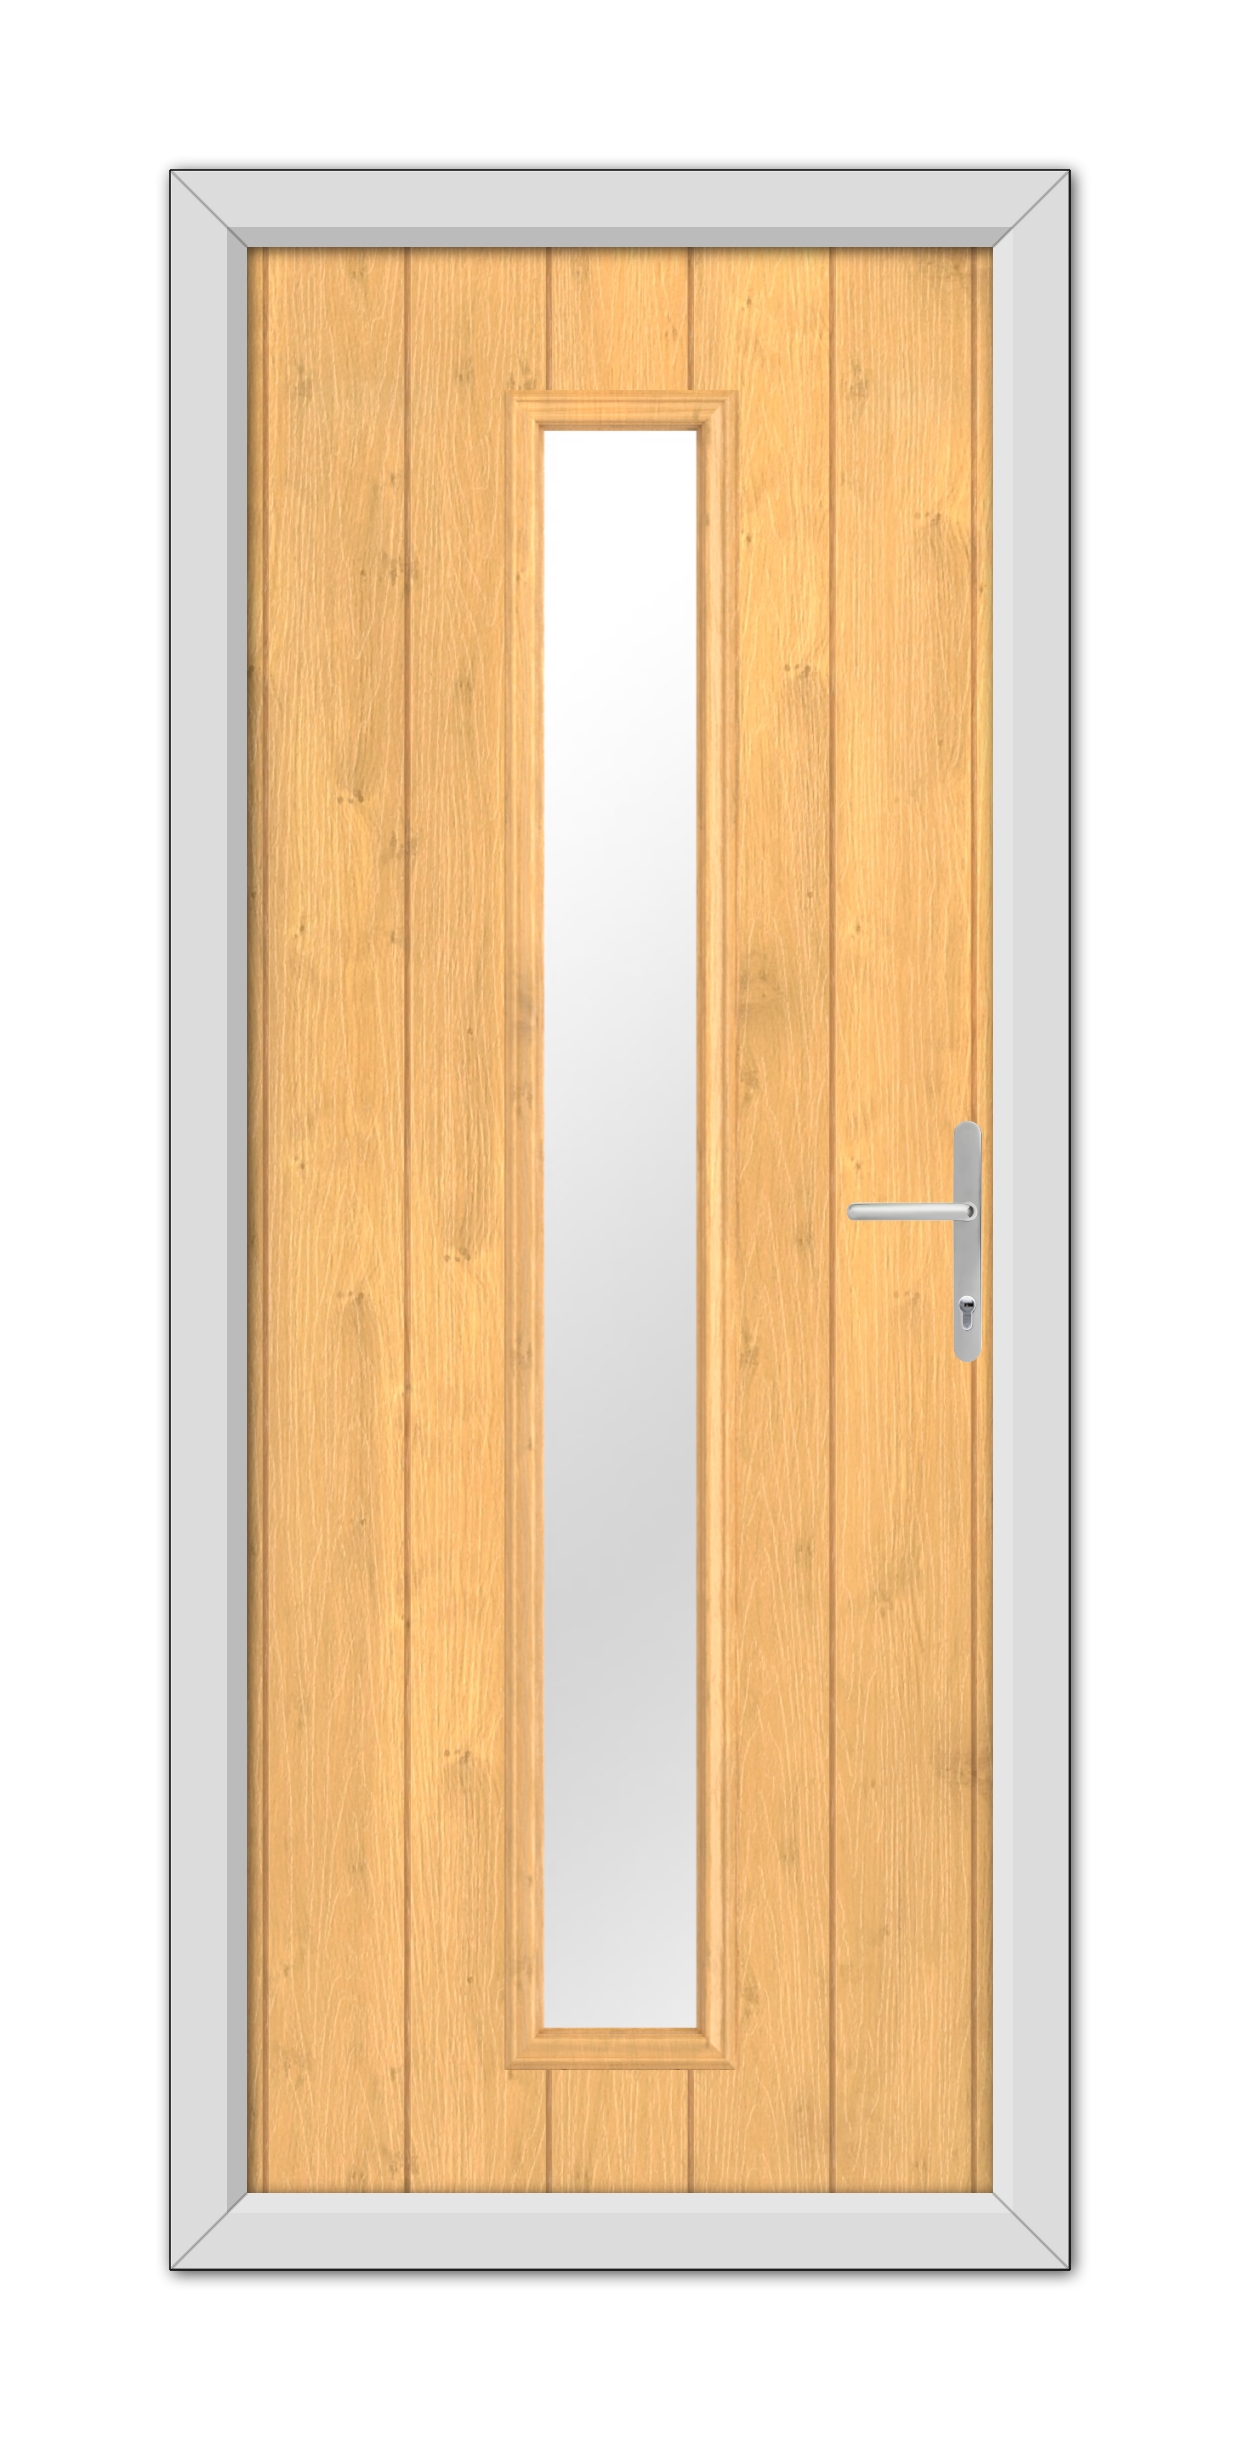 A Irish Oak Rutland Composite Door 48mm Timber Core with a vertical rectangular glass panel, framed in metal, equipped with a modern handle on the right side.